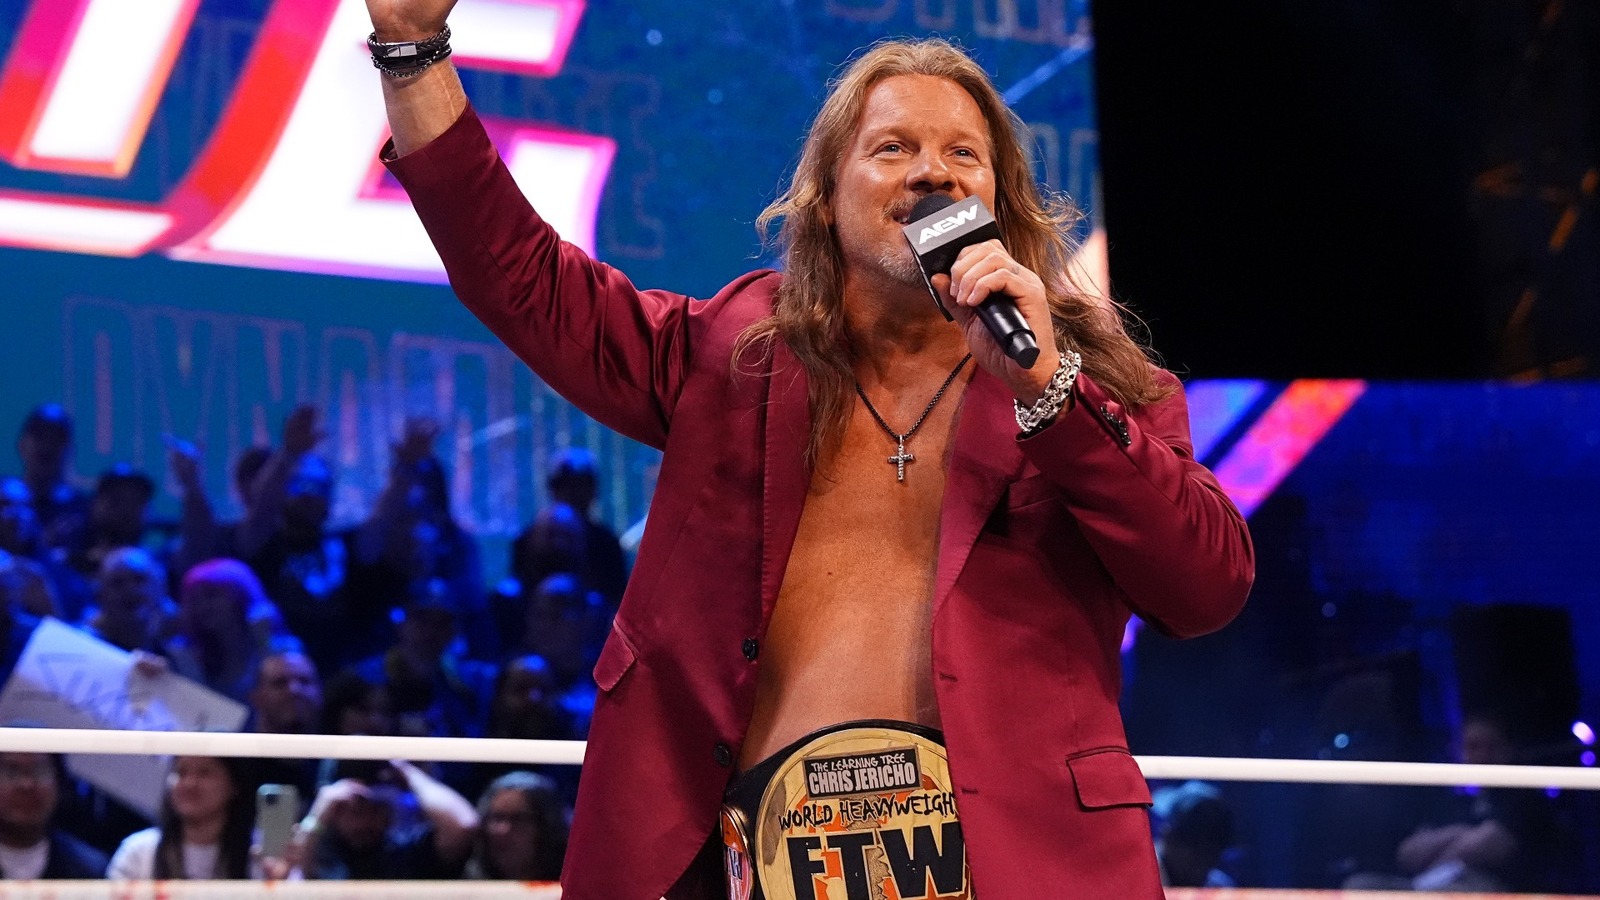 Kevin Sullivan Opens Up About AEW Star Chris Jericho